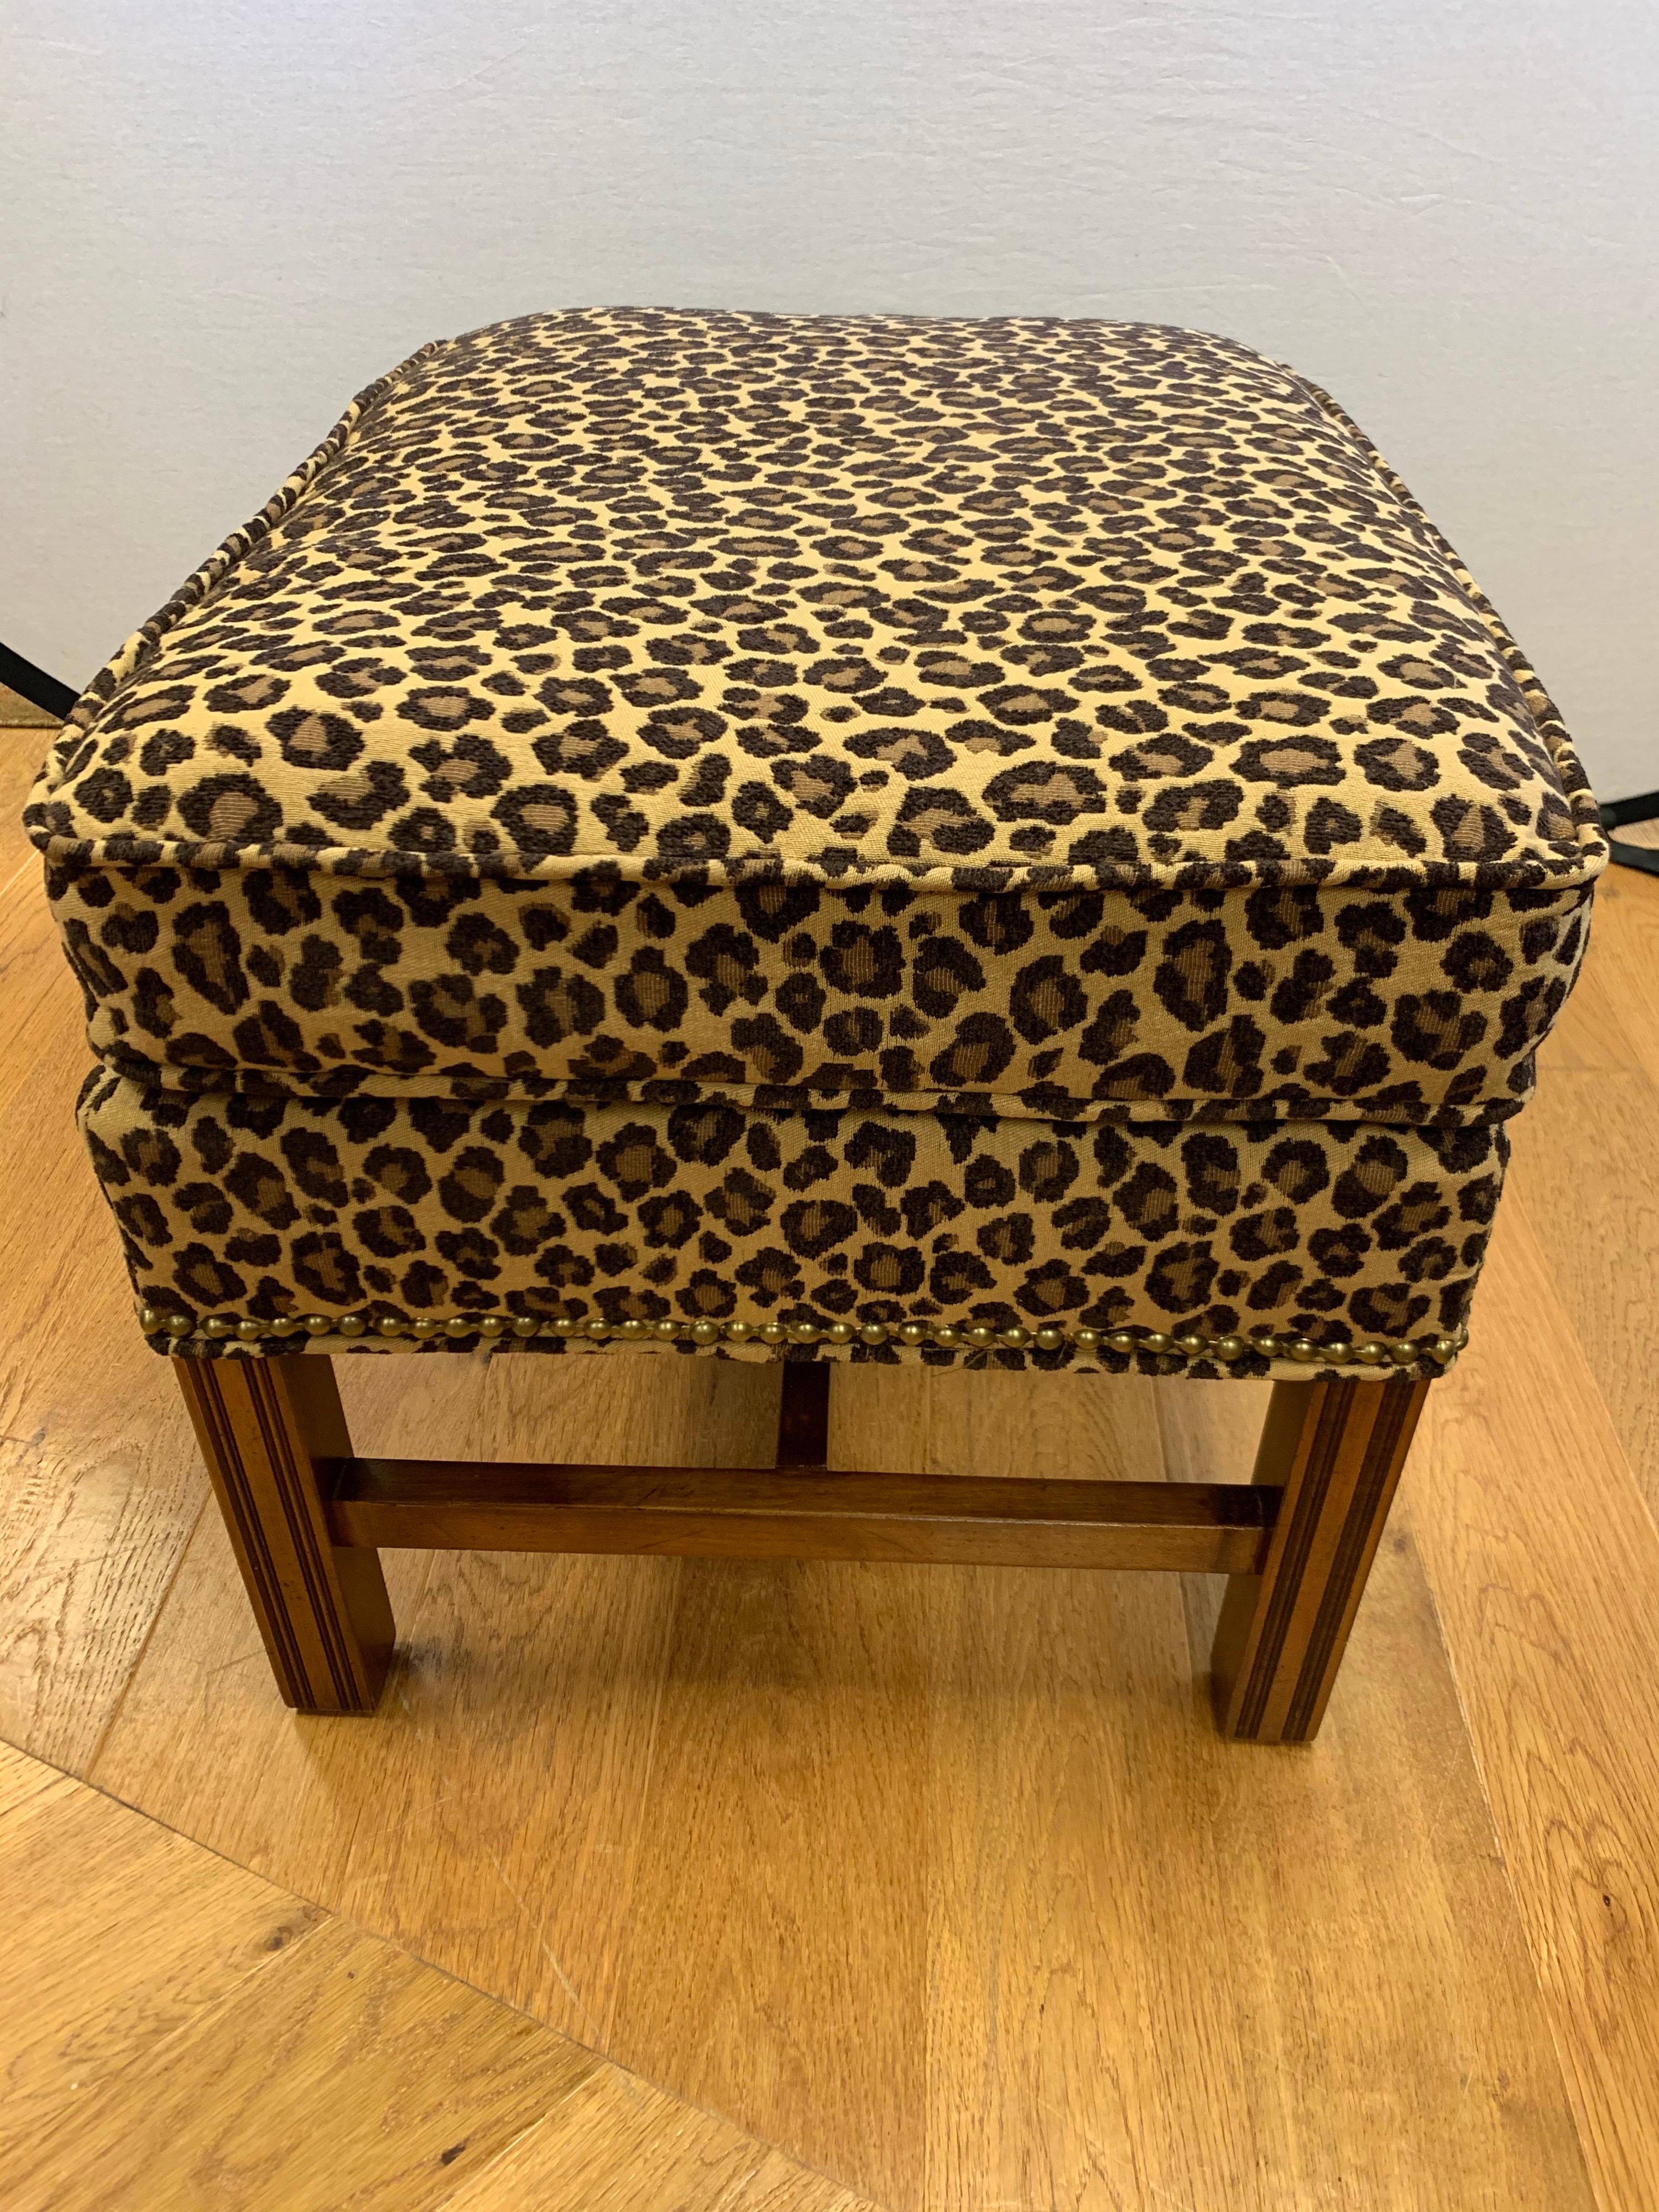 Pair of Berhardt Leopard Print Ottomans Stools Nailhead Newly Upholstered 4